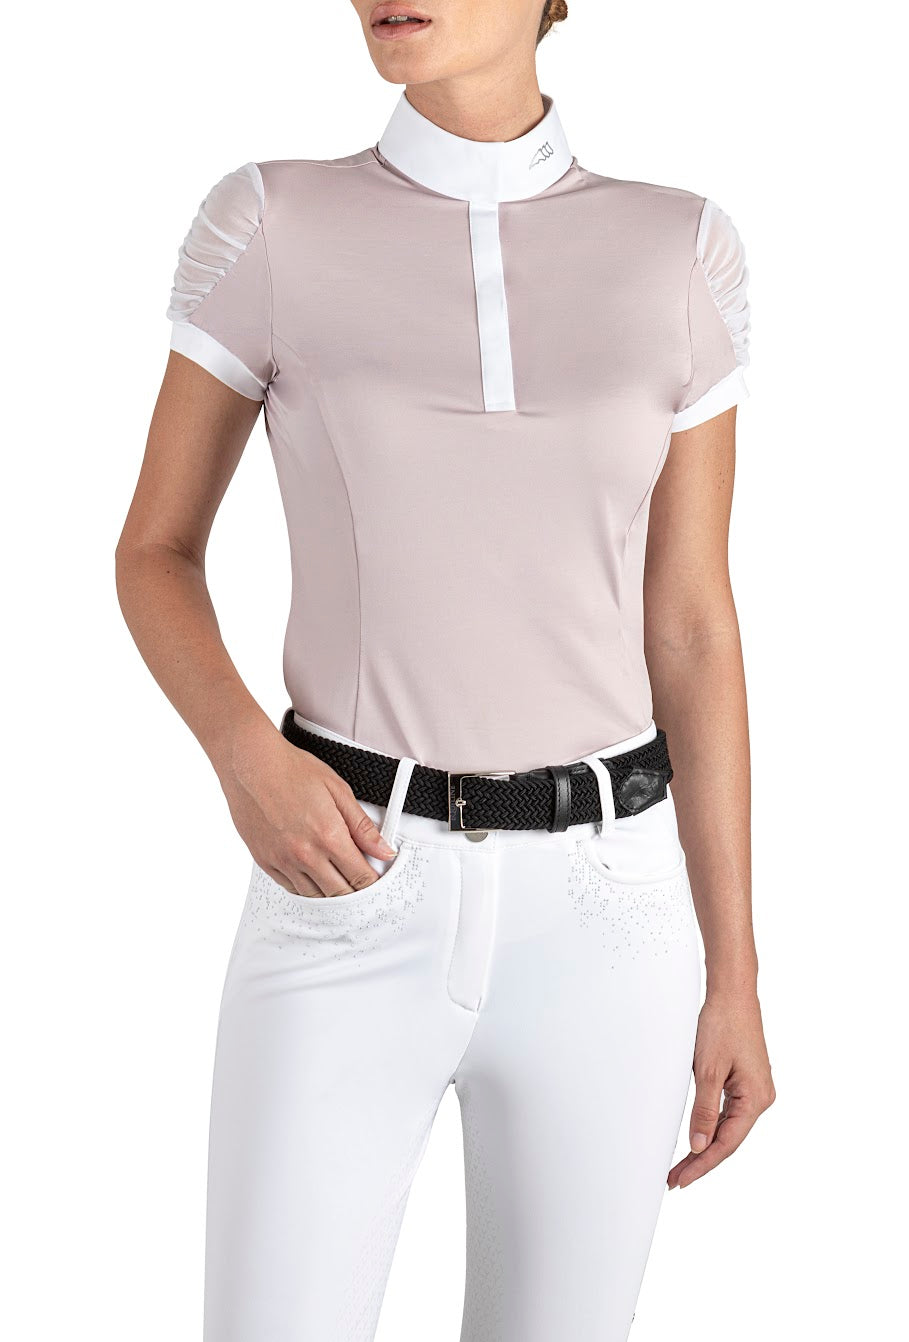 Equiline Womens Ginnyg Dusky Pink S/S Competition riding show Shirt